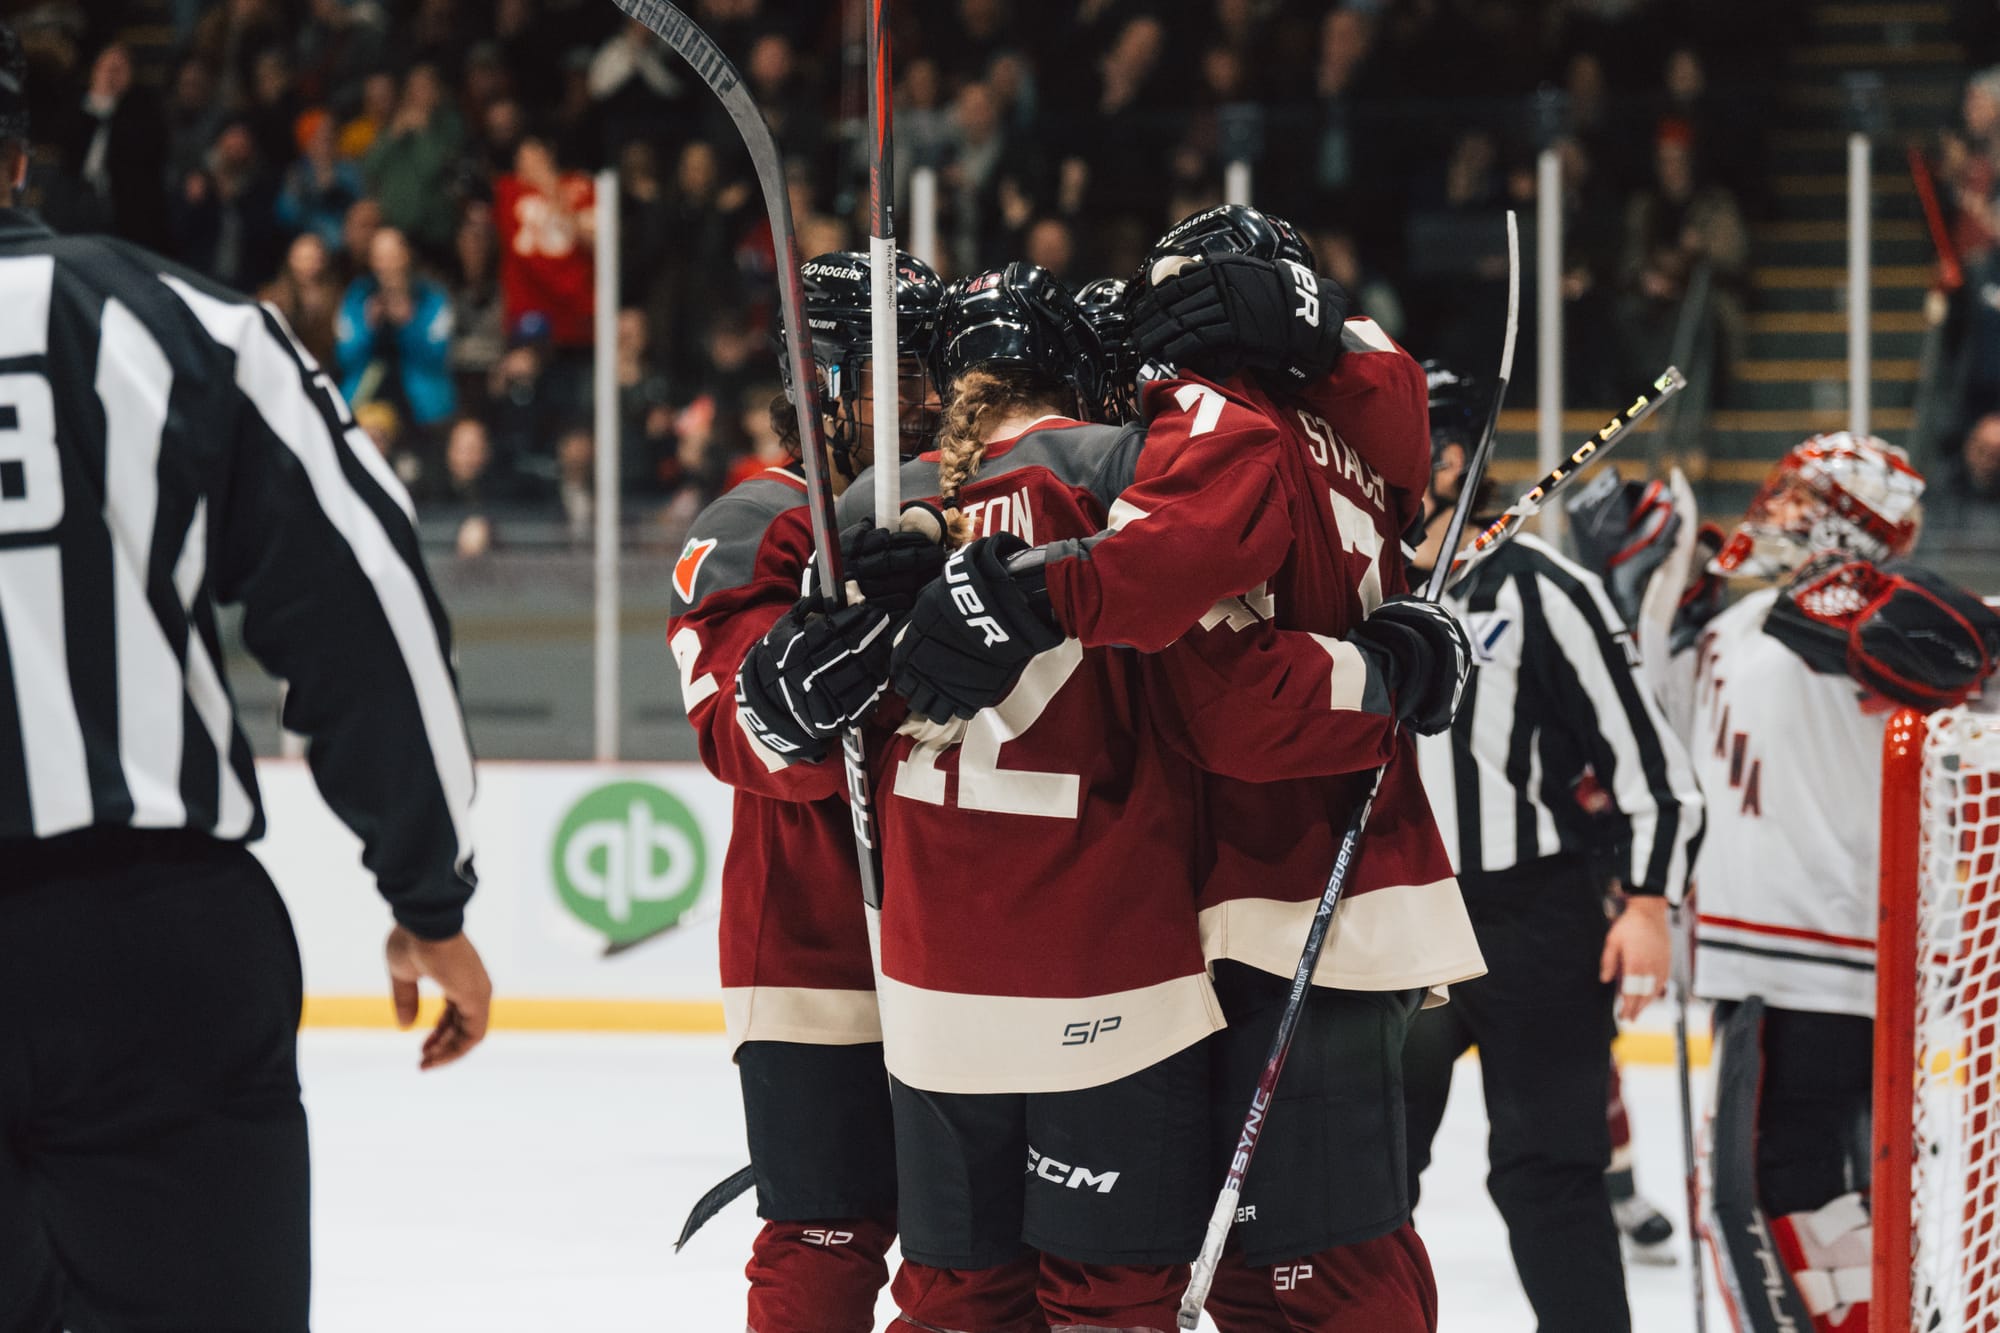 Claire Dalton celebrates one of her goals against Ottawa with her teammates. They are in a group hug and wearing their maroon home uniforms.